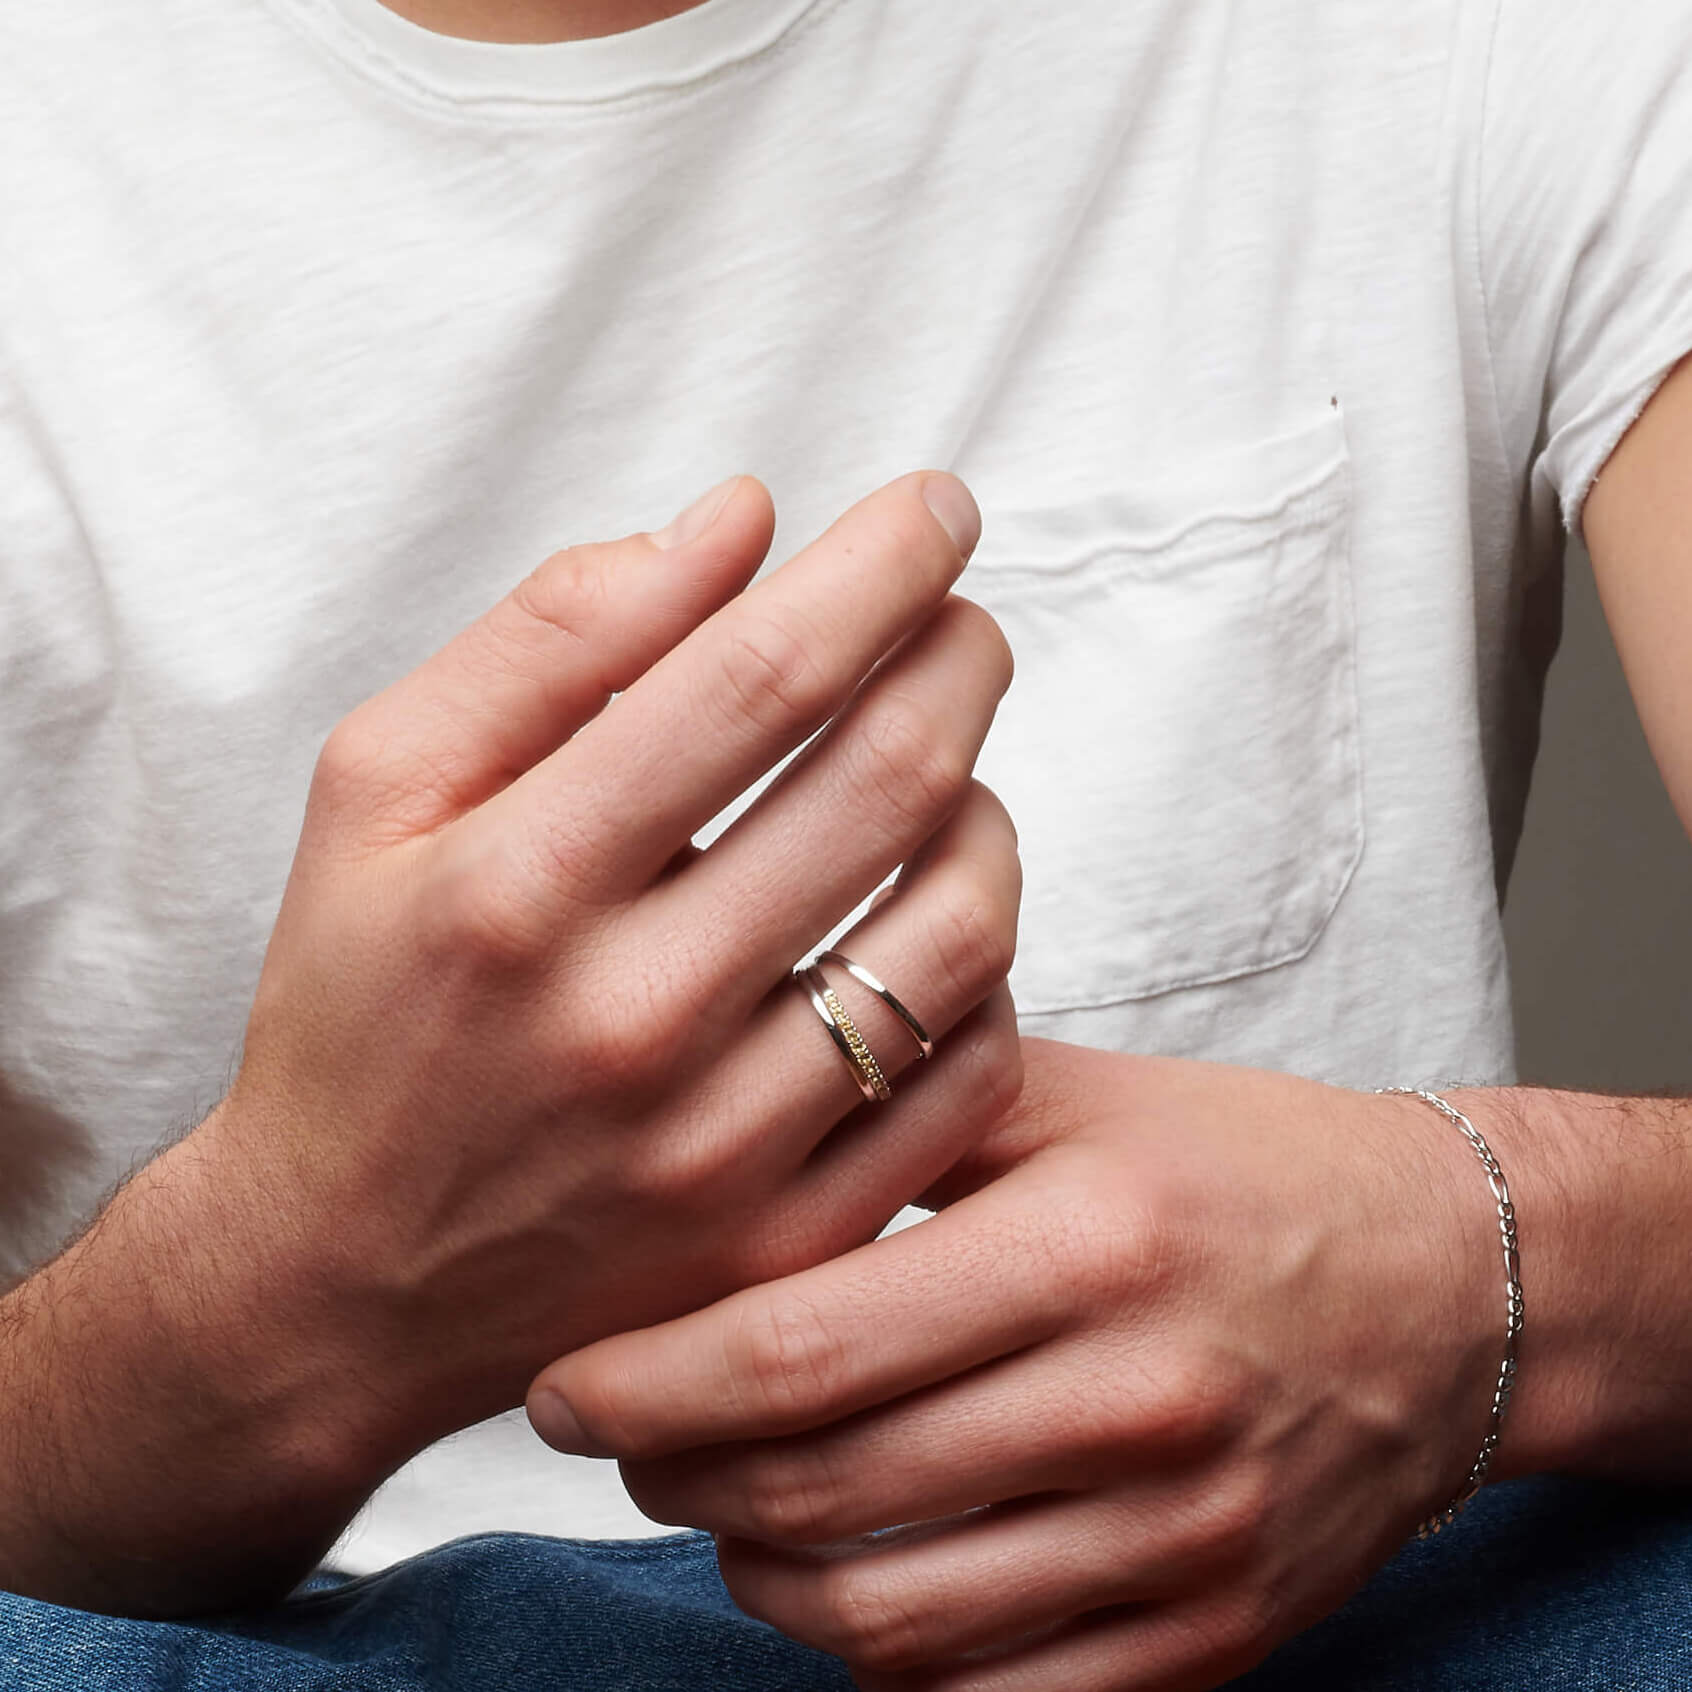 Man's hands with atelium rings and bracelets